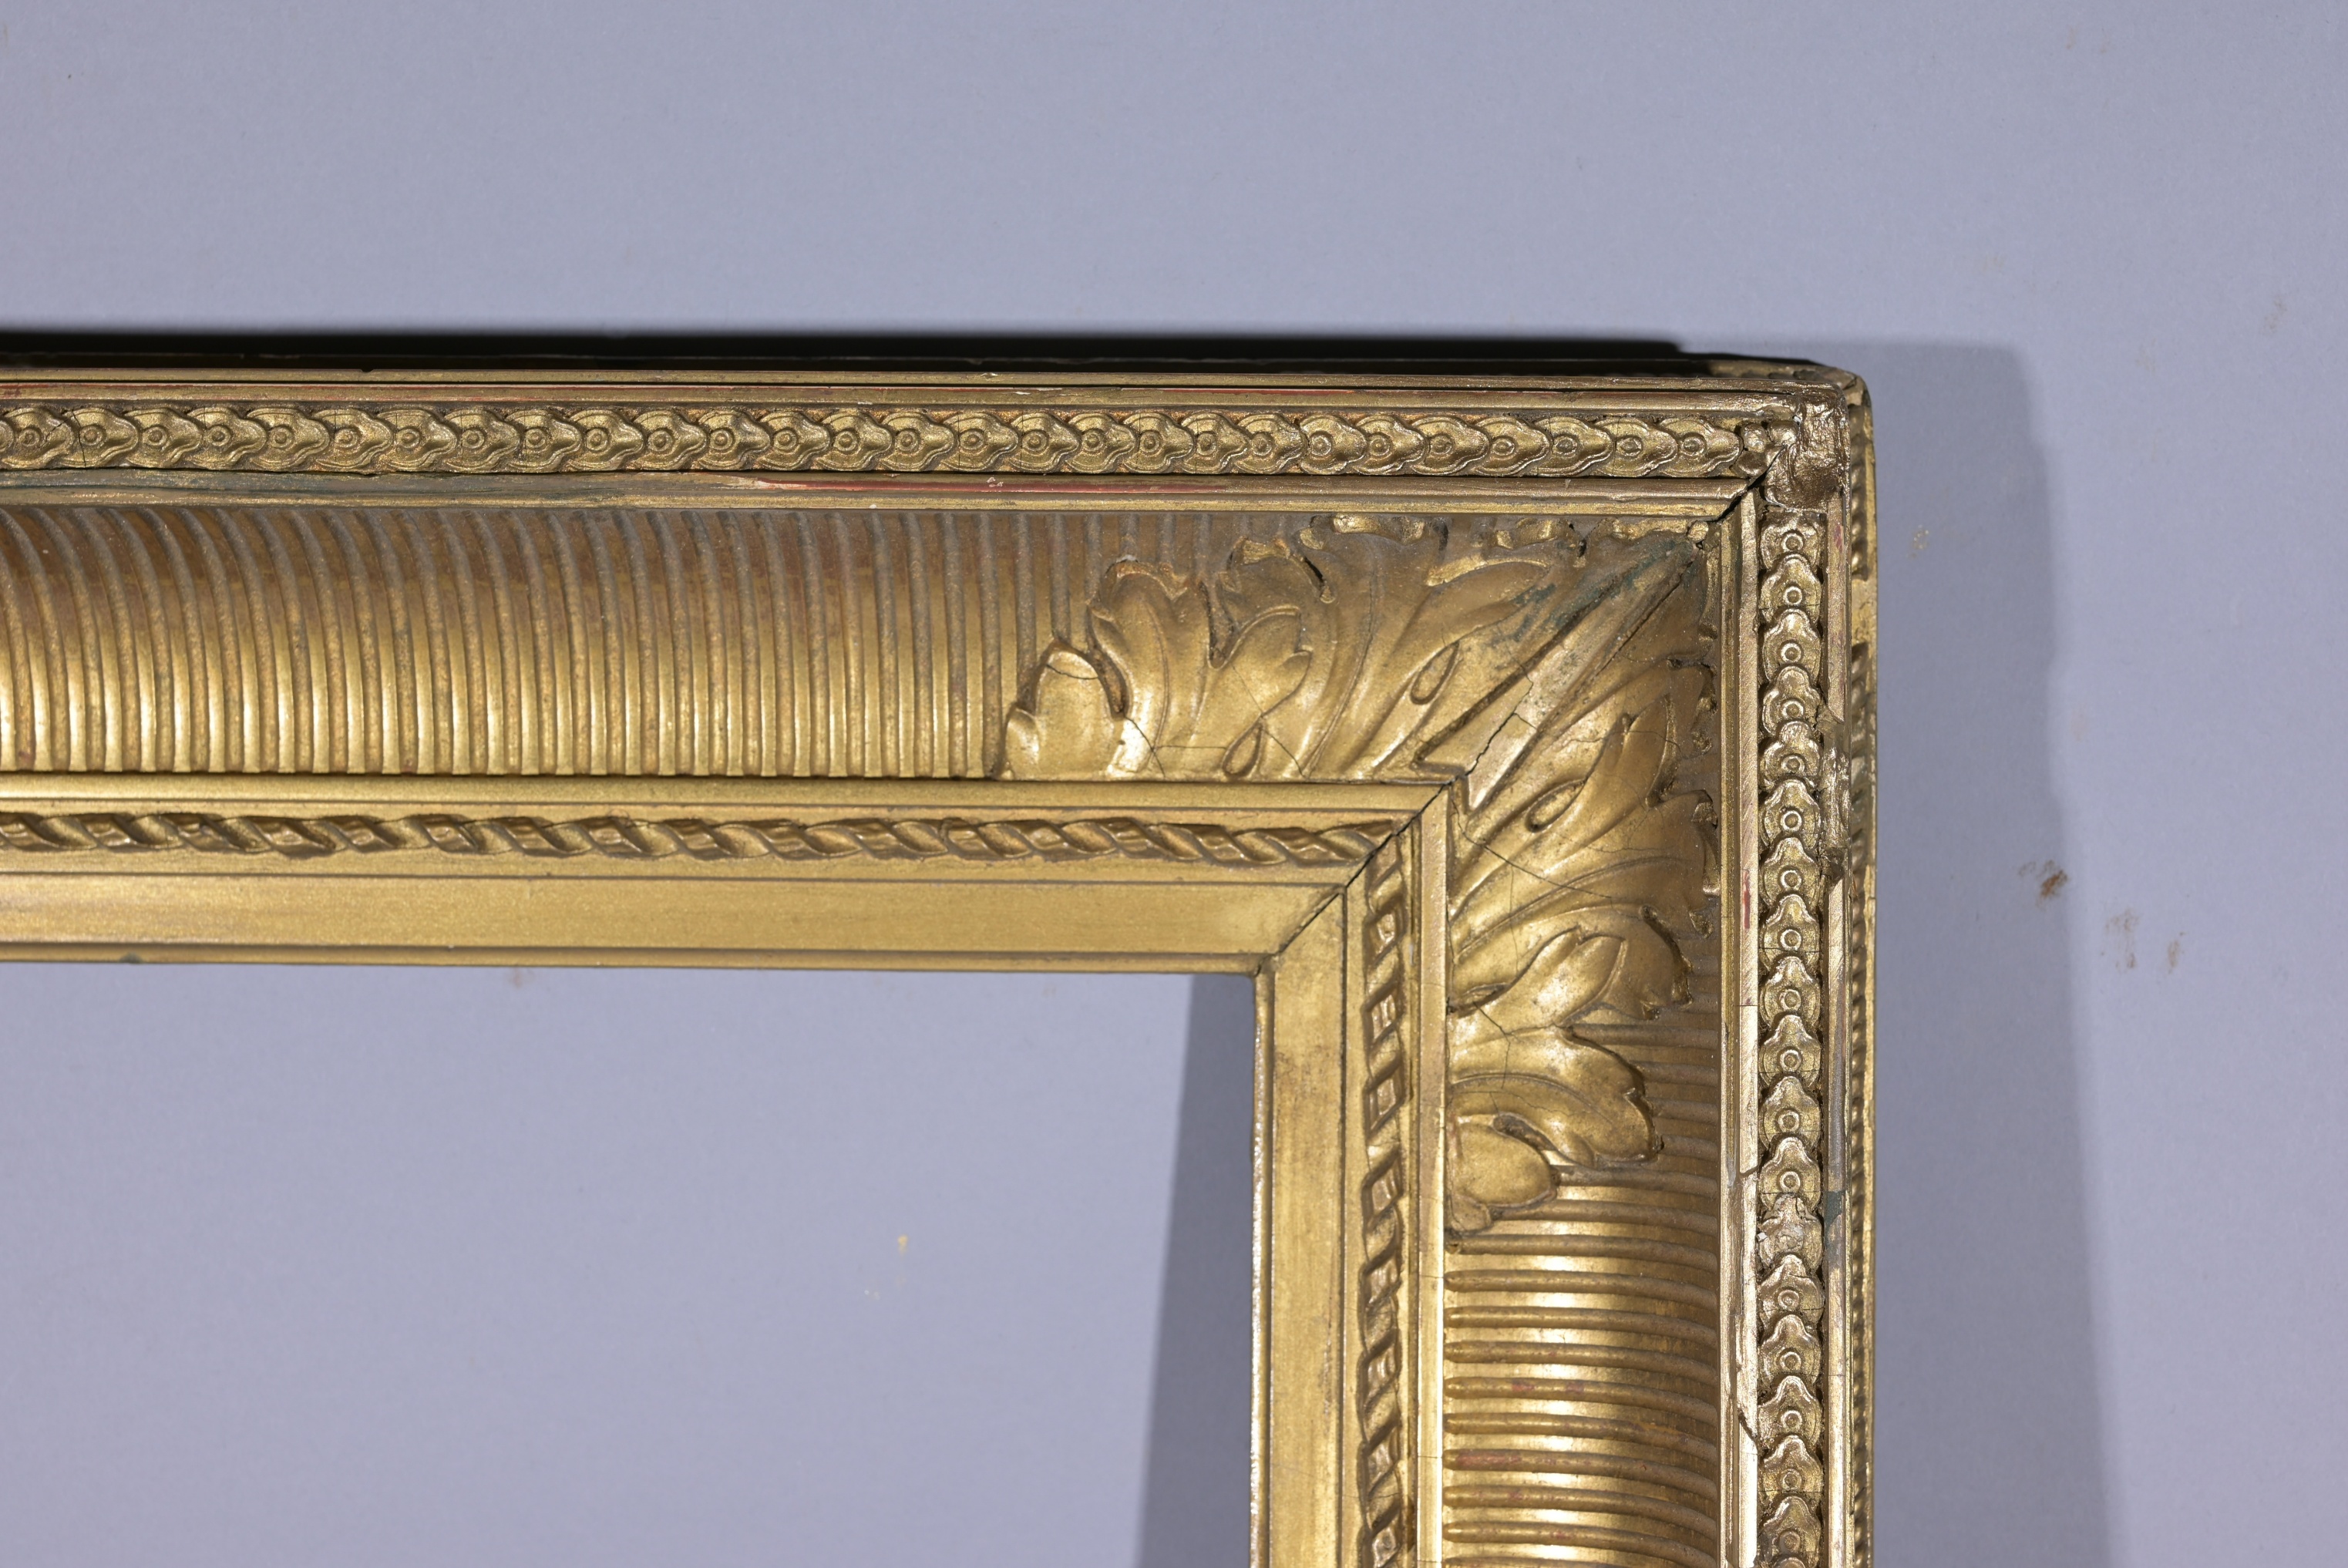 French 1860's Gilt Frame - 29.75 x 20.25 - Image 4 of 8